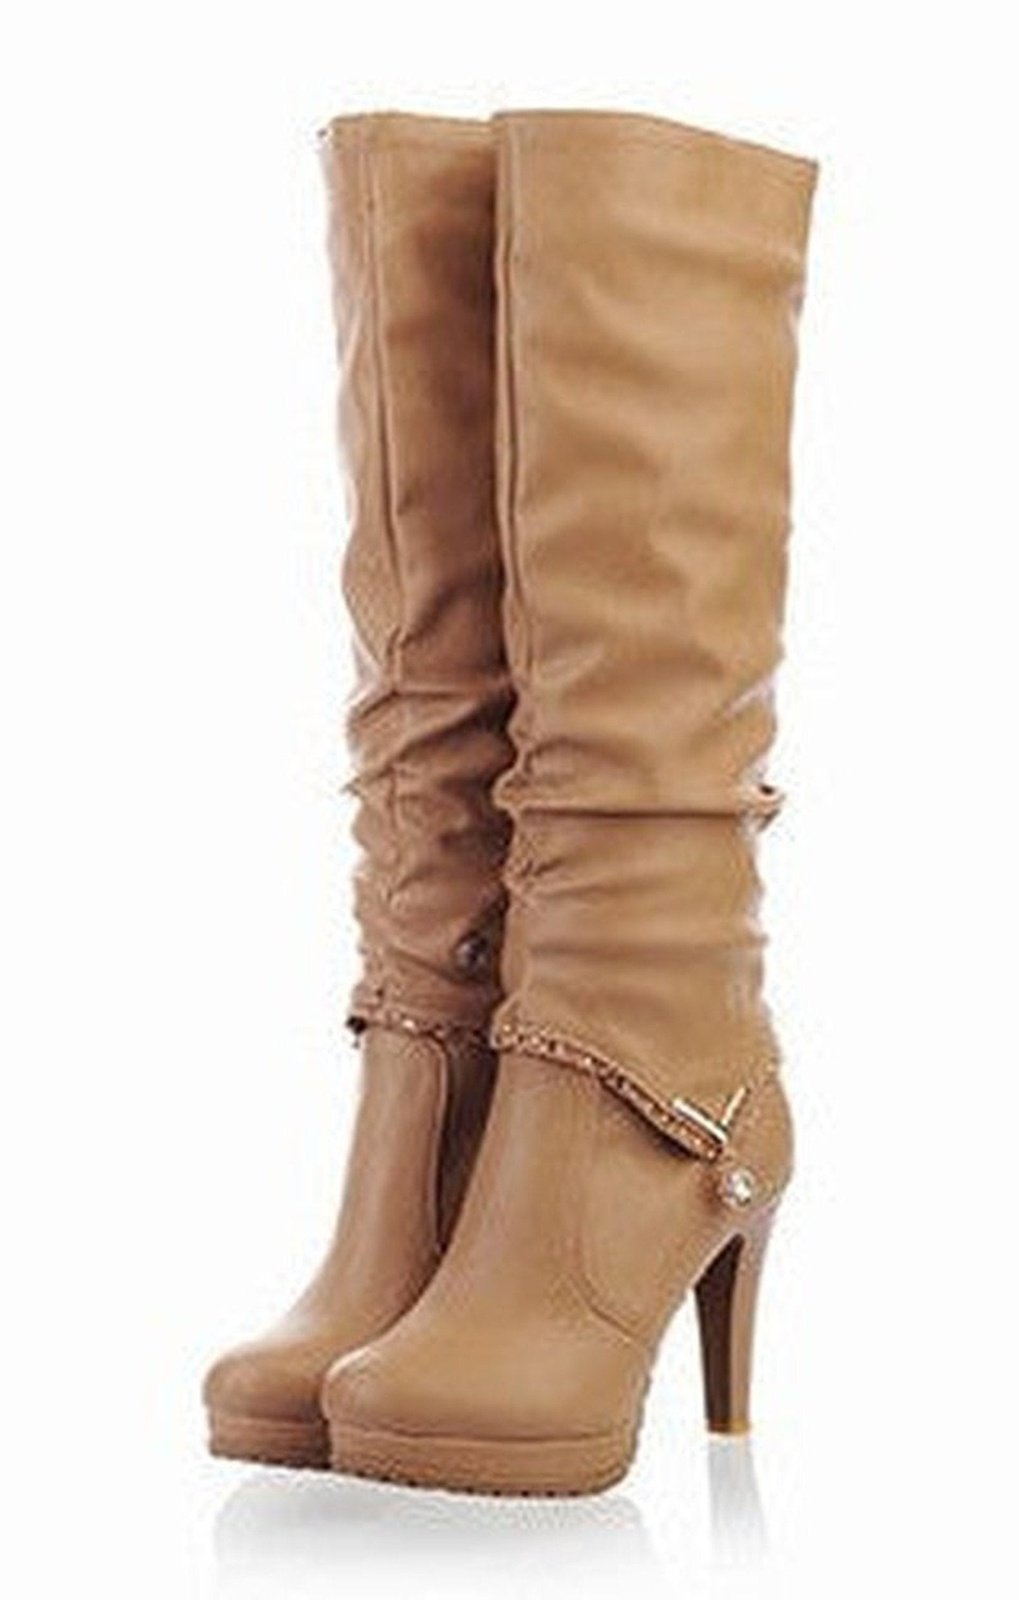 Stiletto Heeled High Boots - Wrinkled Effect / Metal Adornment ( 2 COLORS)